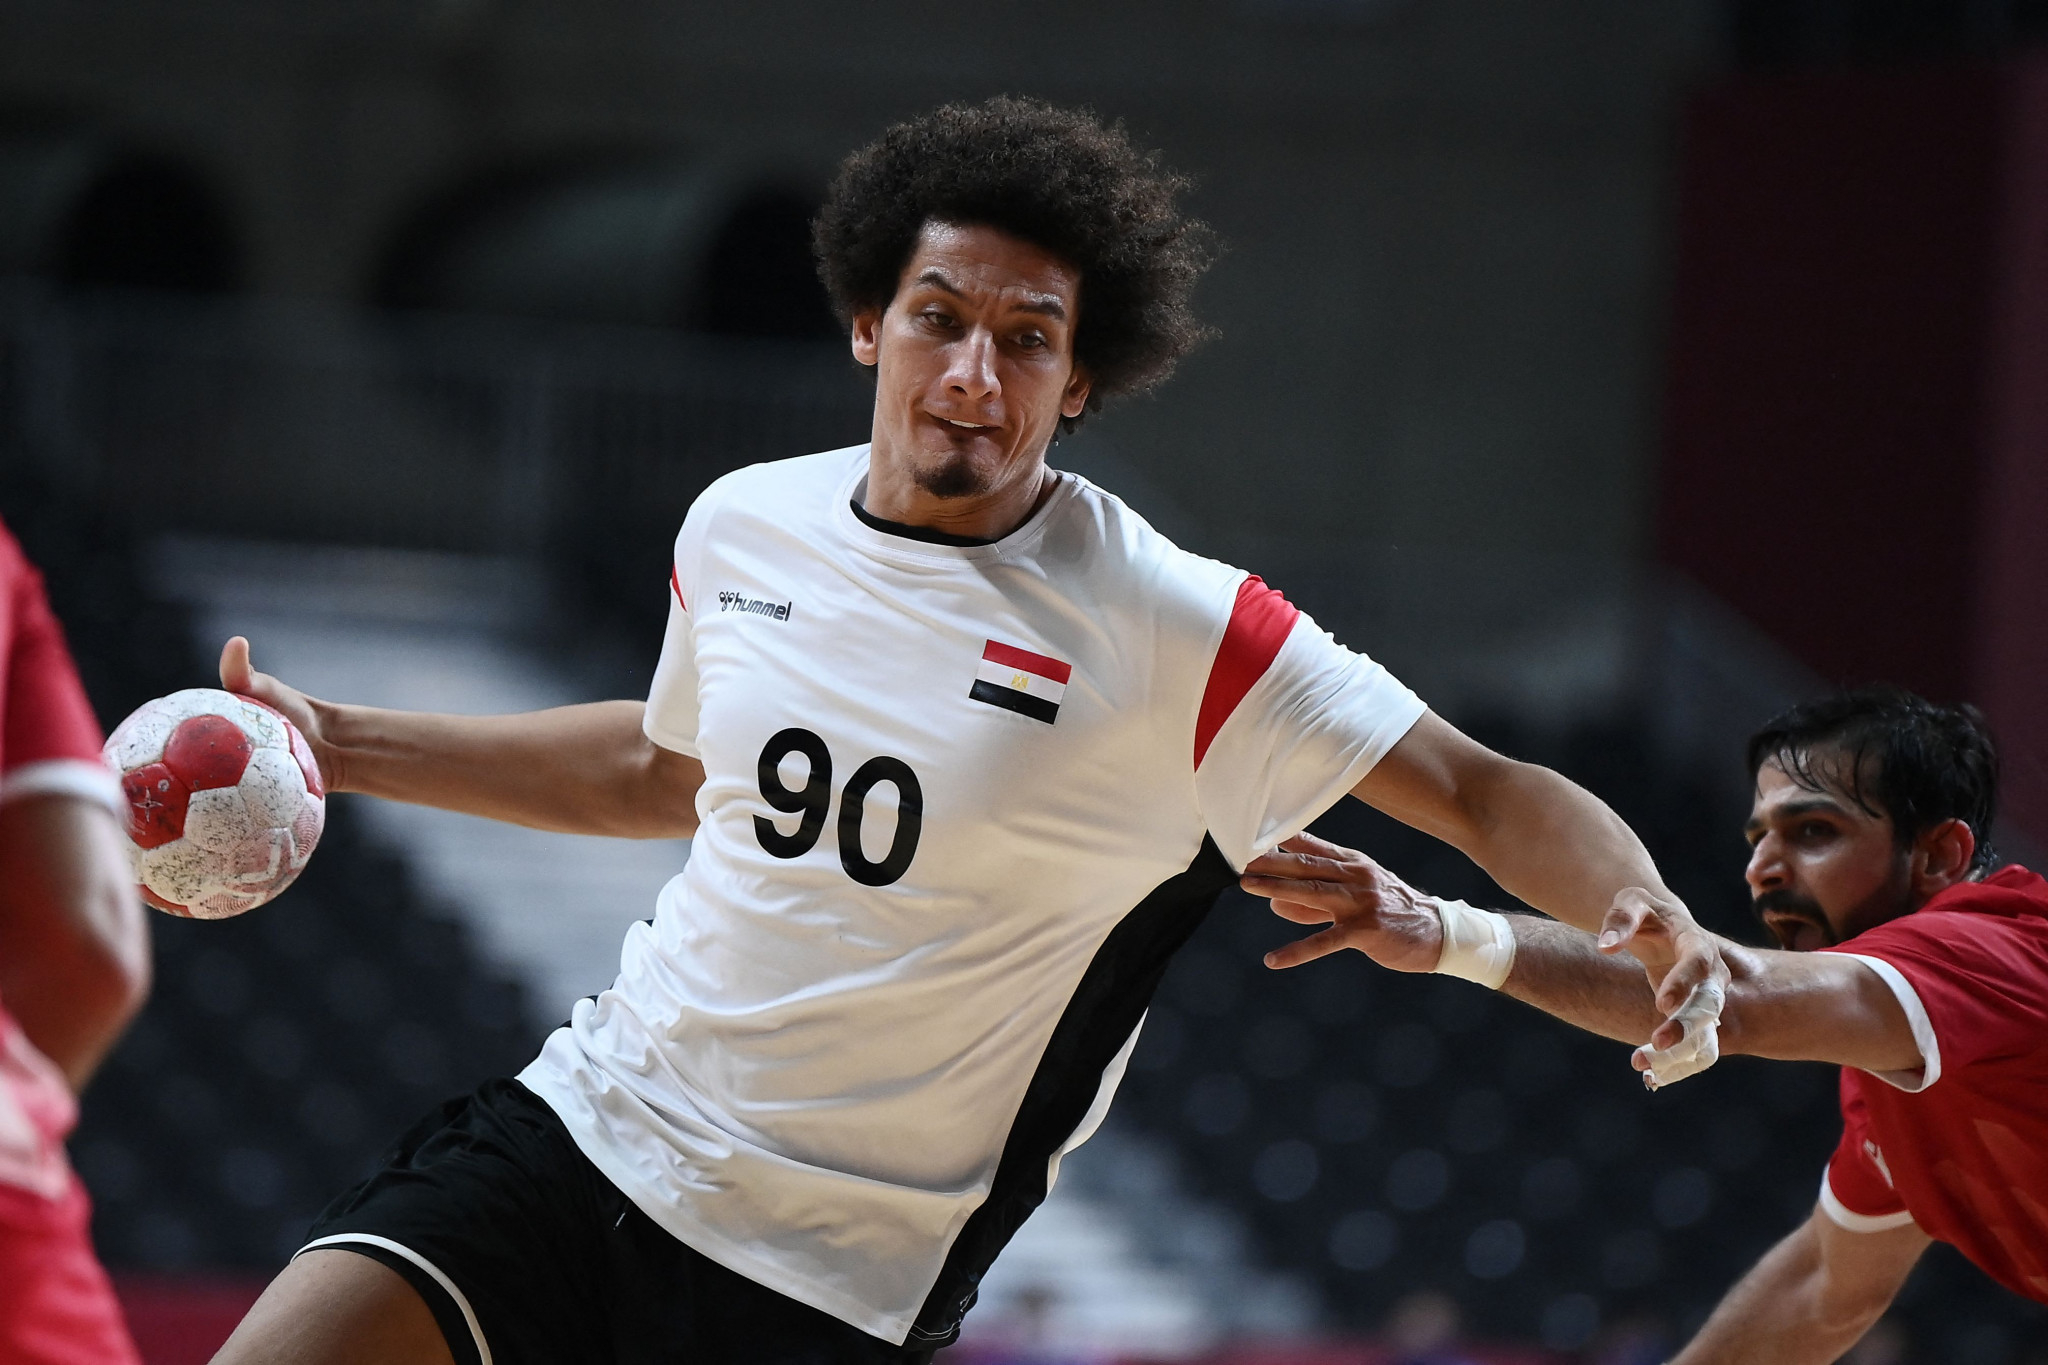 Egypt tipped to retain title at home African Men's Handball Championship